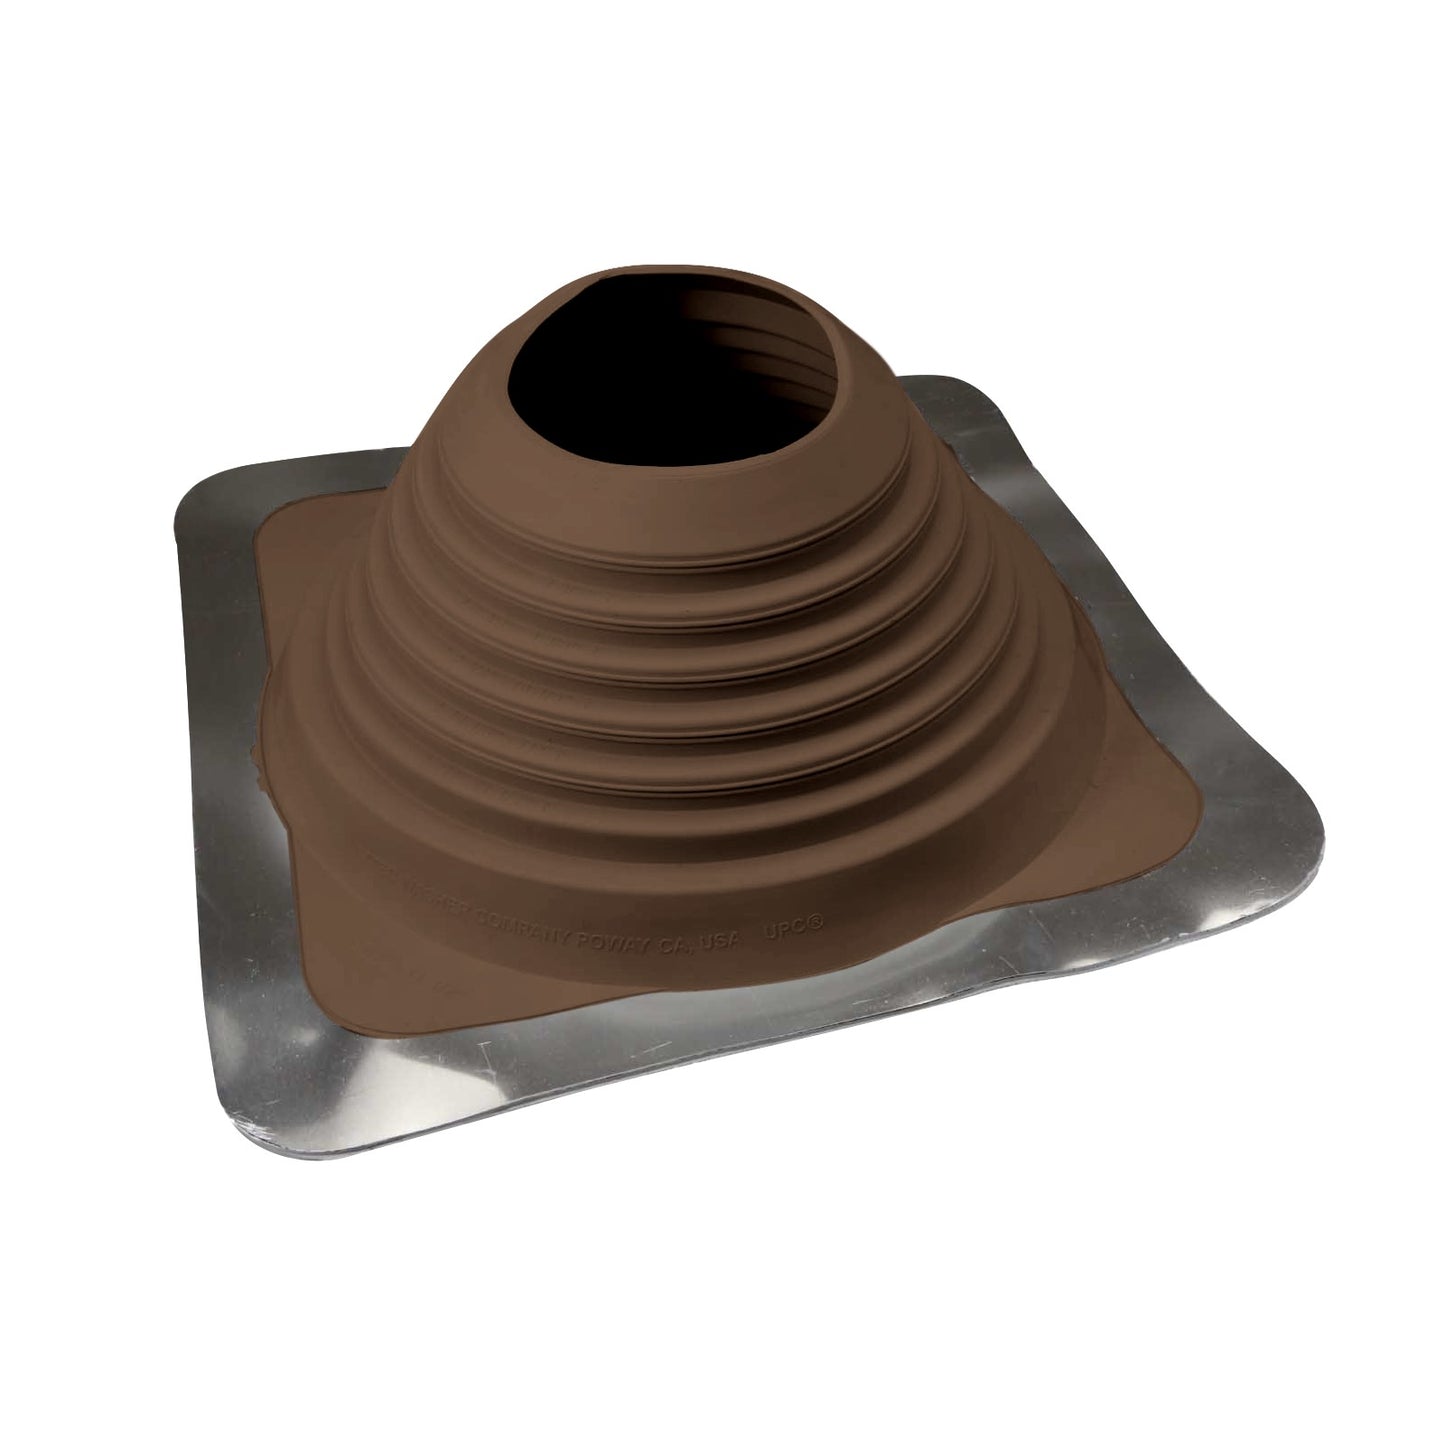 #7 Roofjack Square EPDM Pipe Flashing Boot Brown